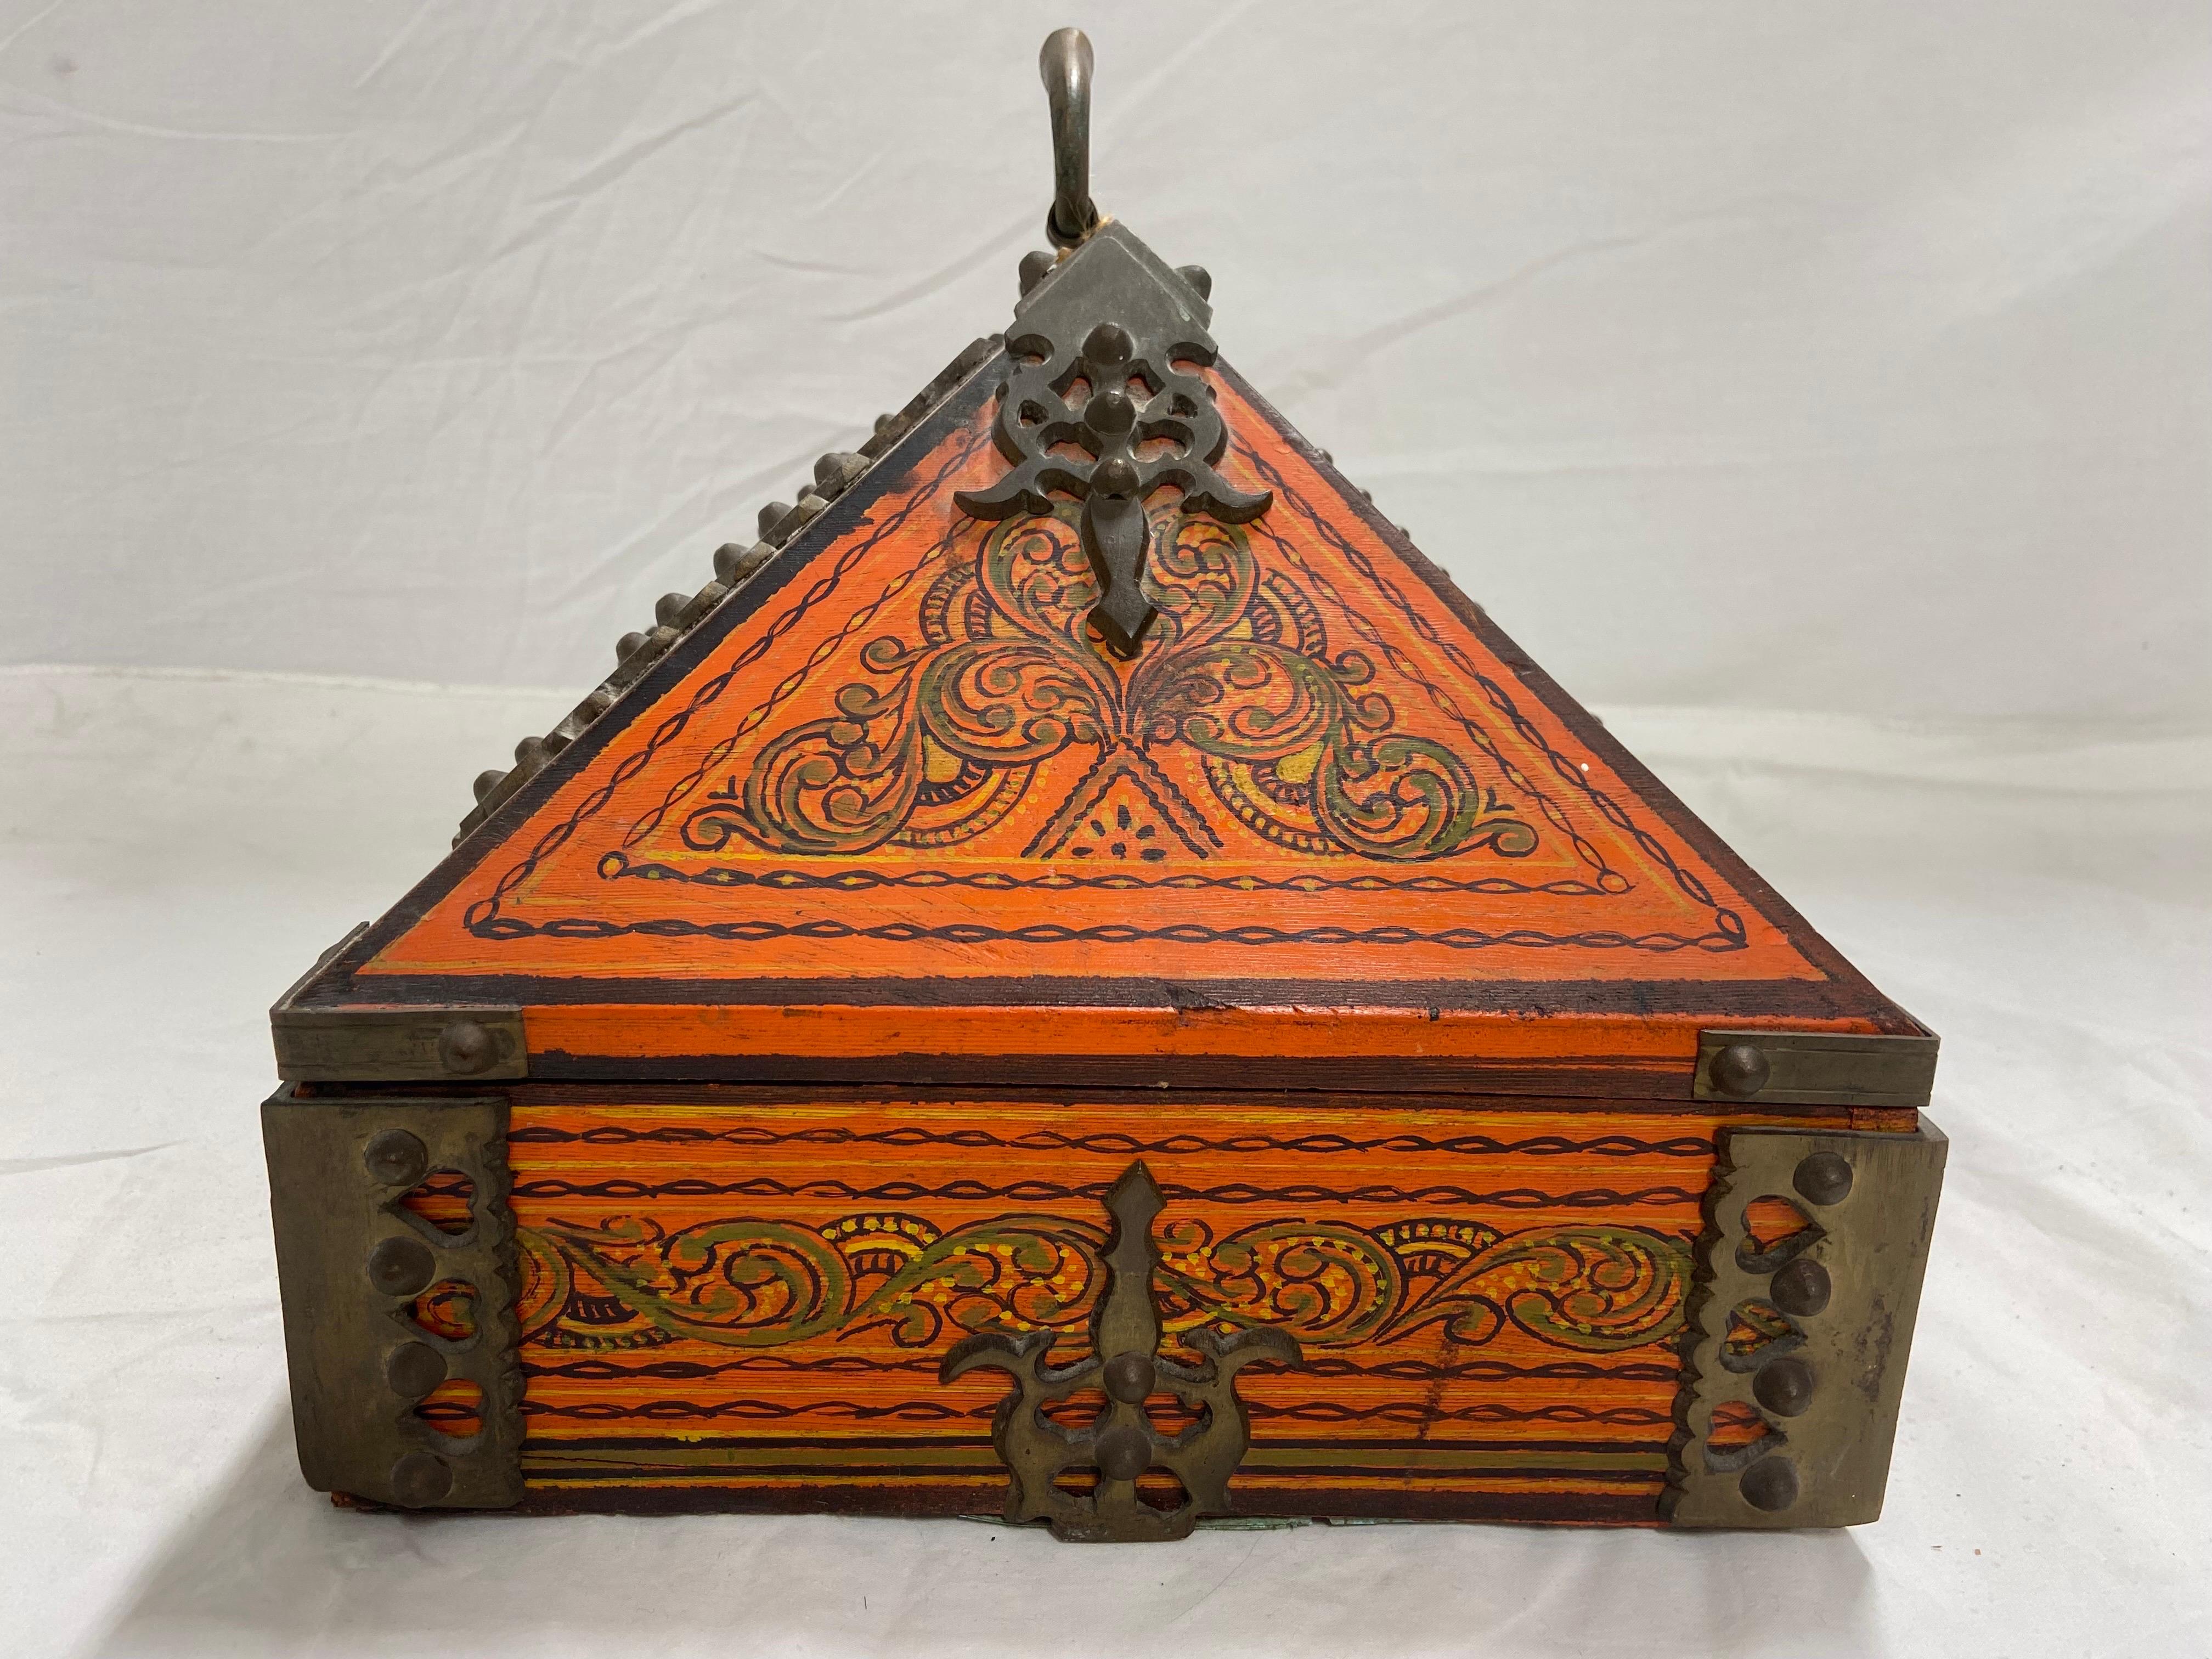 Hand-Painted Vintage Large Indian Dowry Box with Ornate Brass Hinges and Paint Decoration